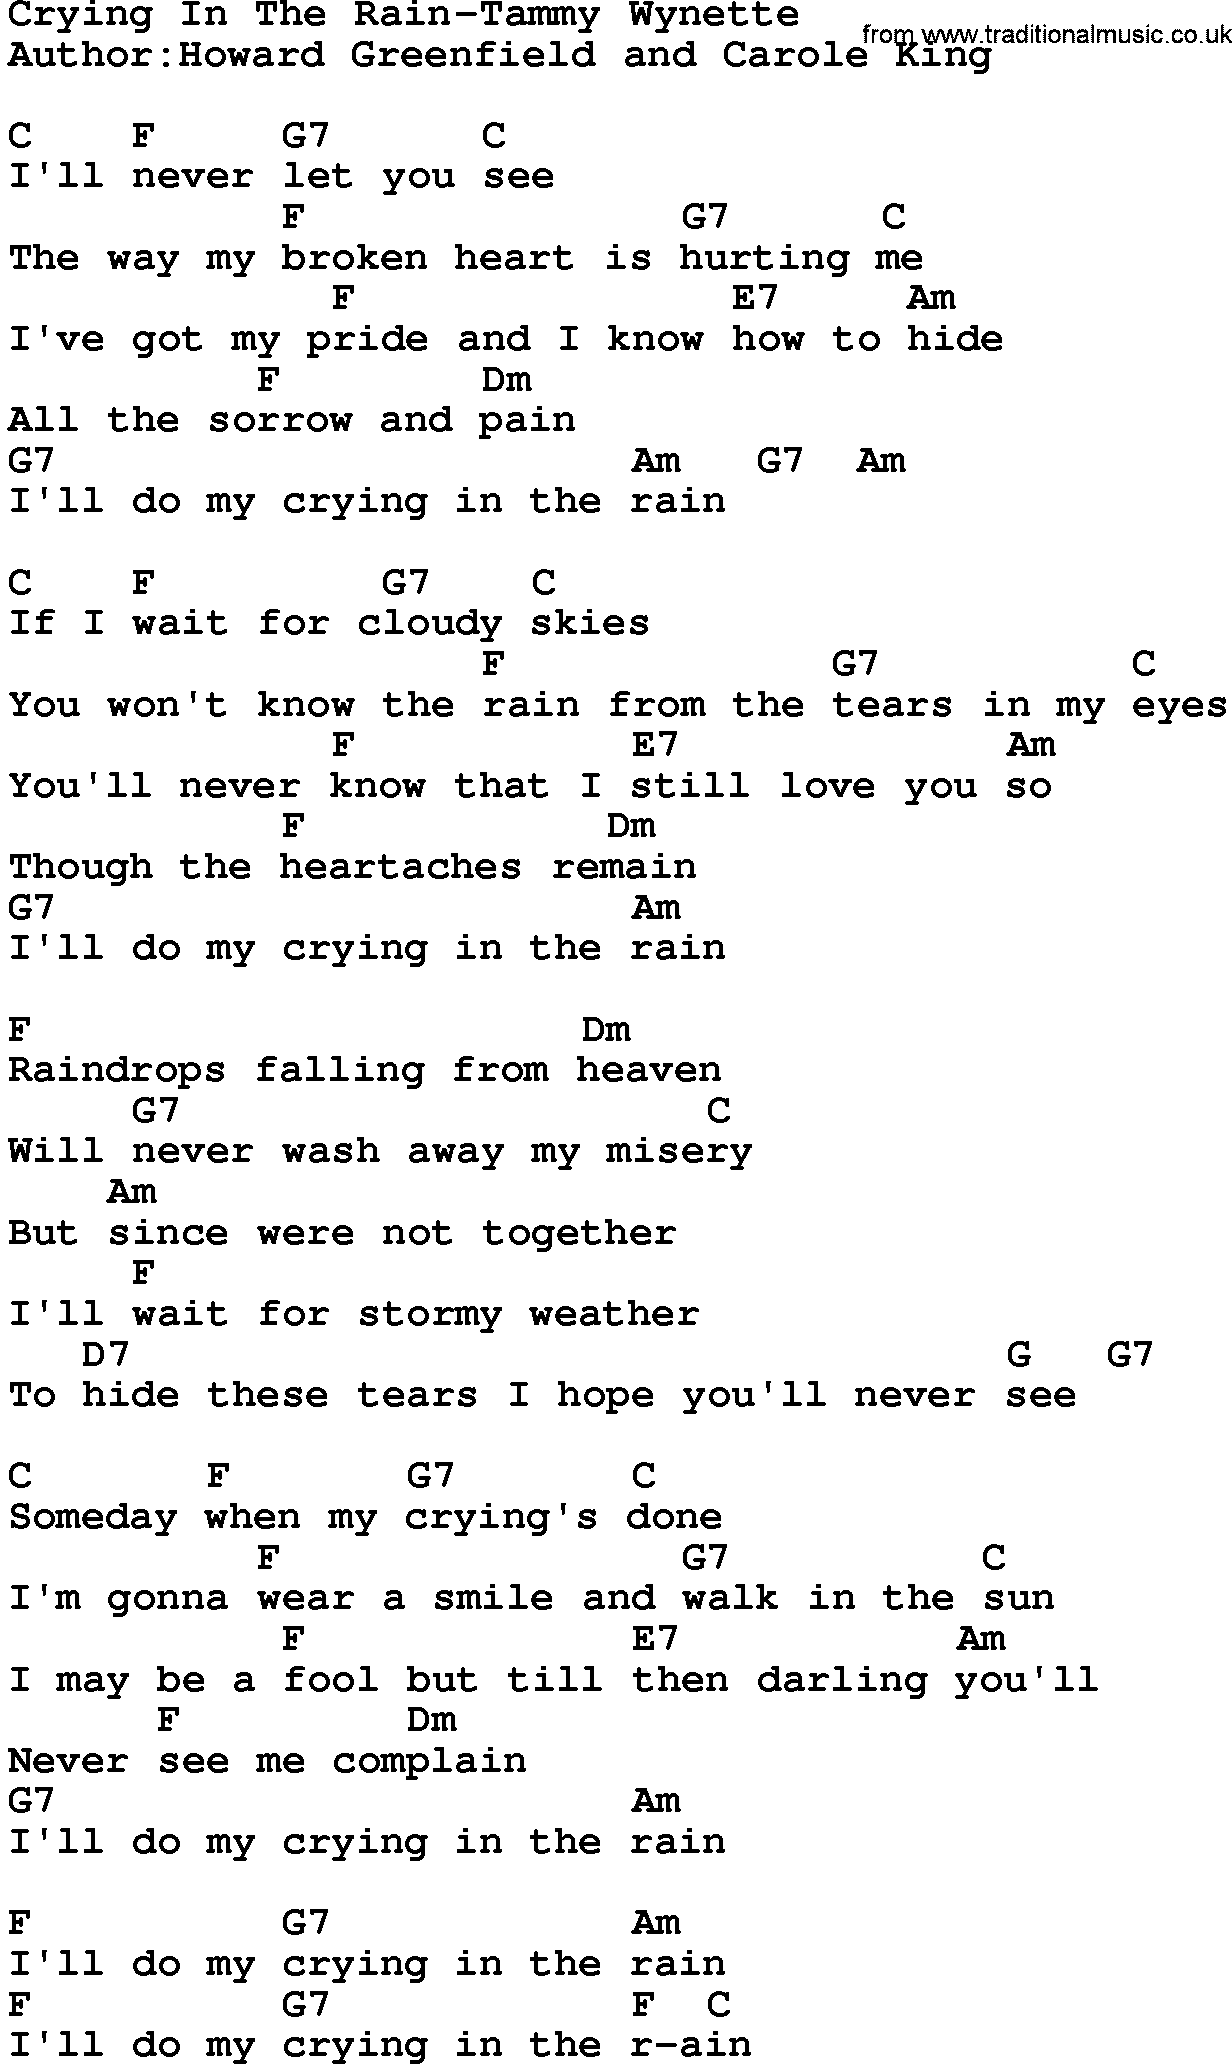 Country music song: Crying In The Rain-Tammy Wynette lyrics and chords